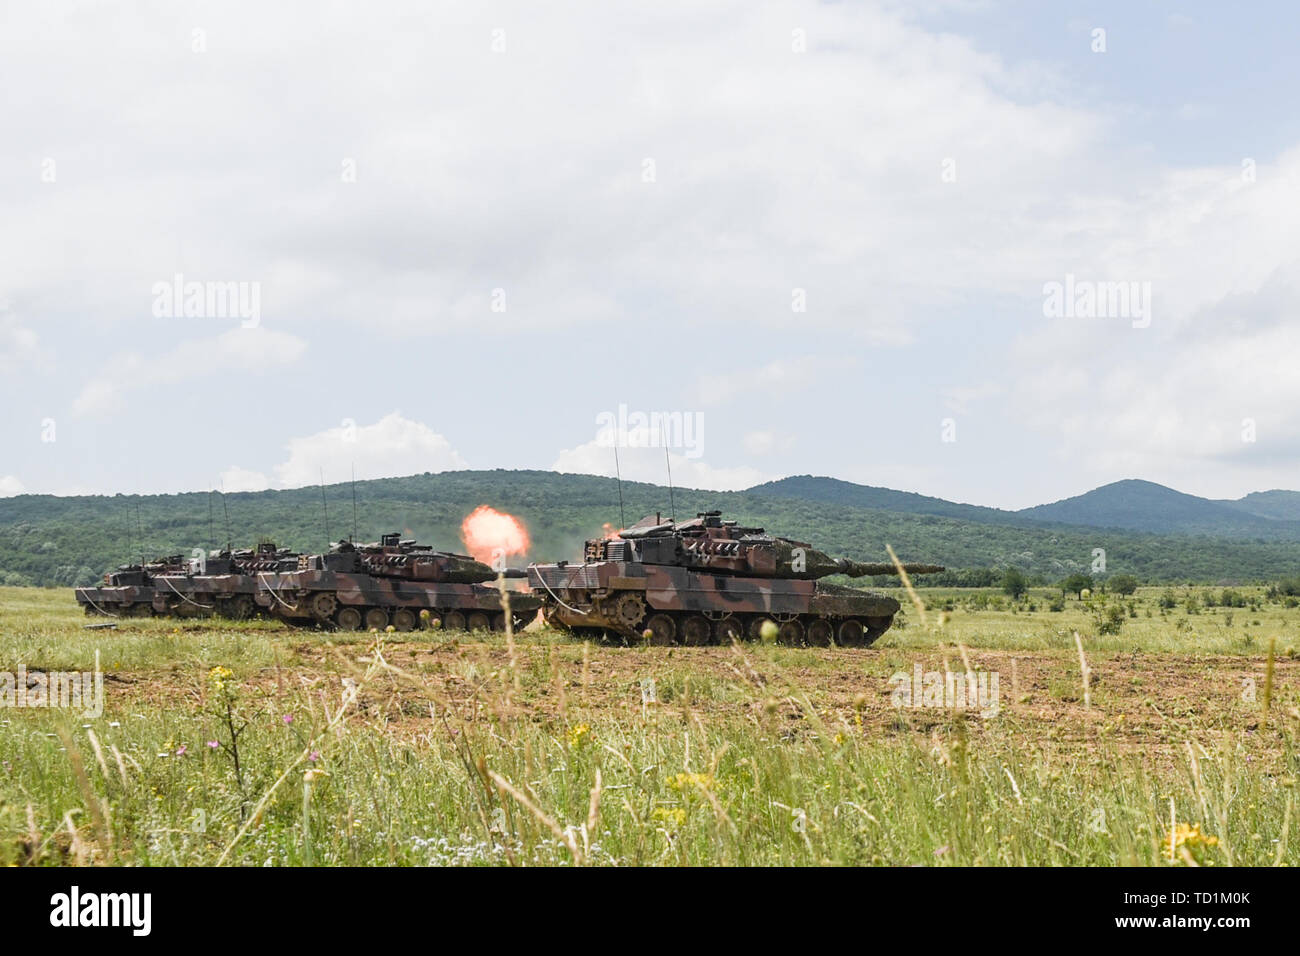 A platoon of German Leopard tanks controlled by the Greek Army fire upon distant targets June 10, 2019 on Novo Selo Training Area, Bulgaria, as a part of STRIKE BACK 19. This was the beginning of the second day of a two-part exercise in which a hilltop fighting position was lost and must be regained with the help of two platoons of U.S. Army Bradley Fighting Vehicles from 1 Battalion 16th Infantry Regiment and a Bulgarian armored unit.    STRIKE BACK 19 is a multinational exercise hosted by the Bulgarian Armed Forces at Novo Selo Training Area, Bulgaria, from June 6-20, 2019. STRIKE BACK 19 is Stock Photo